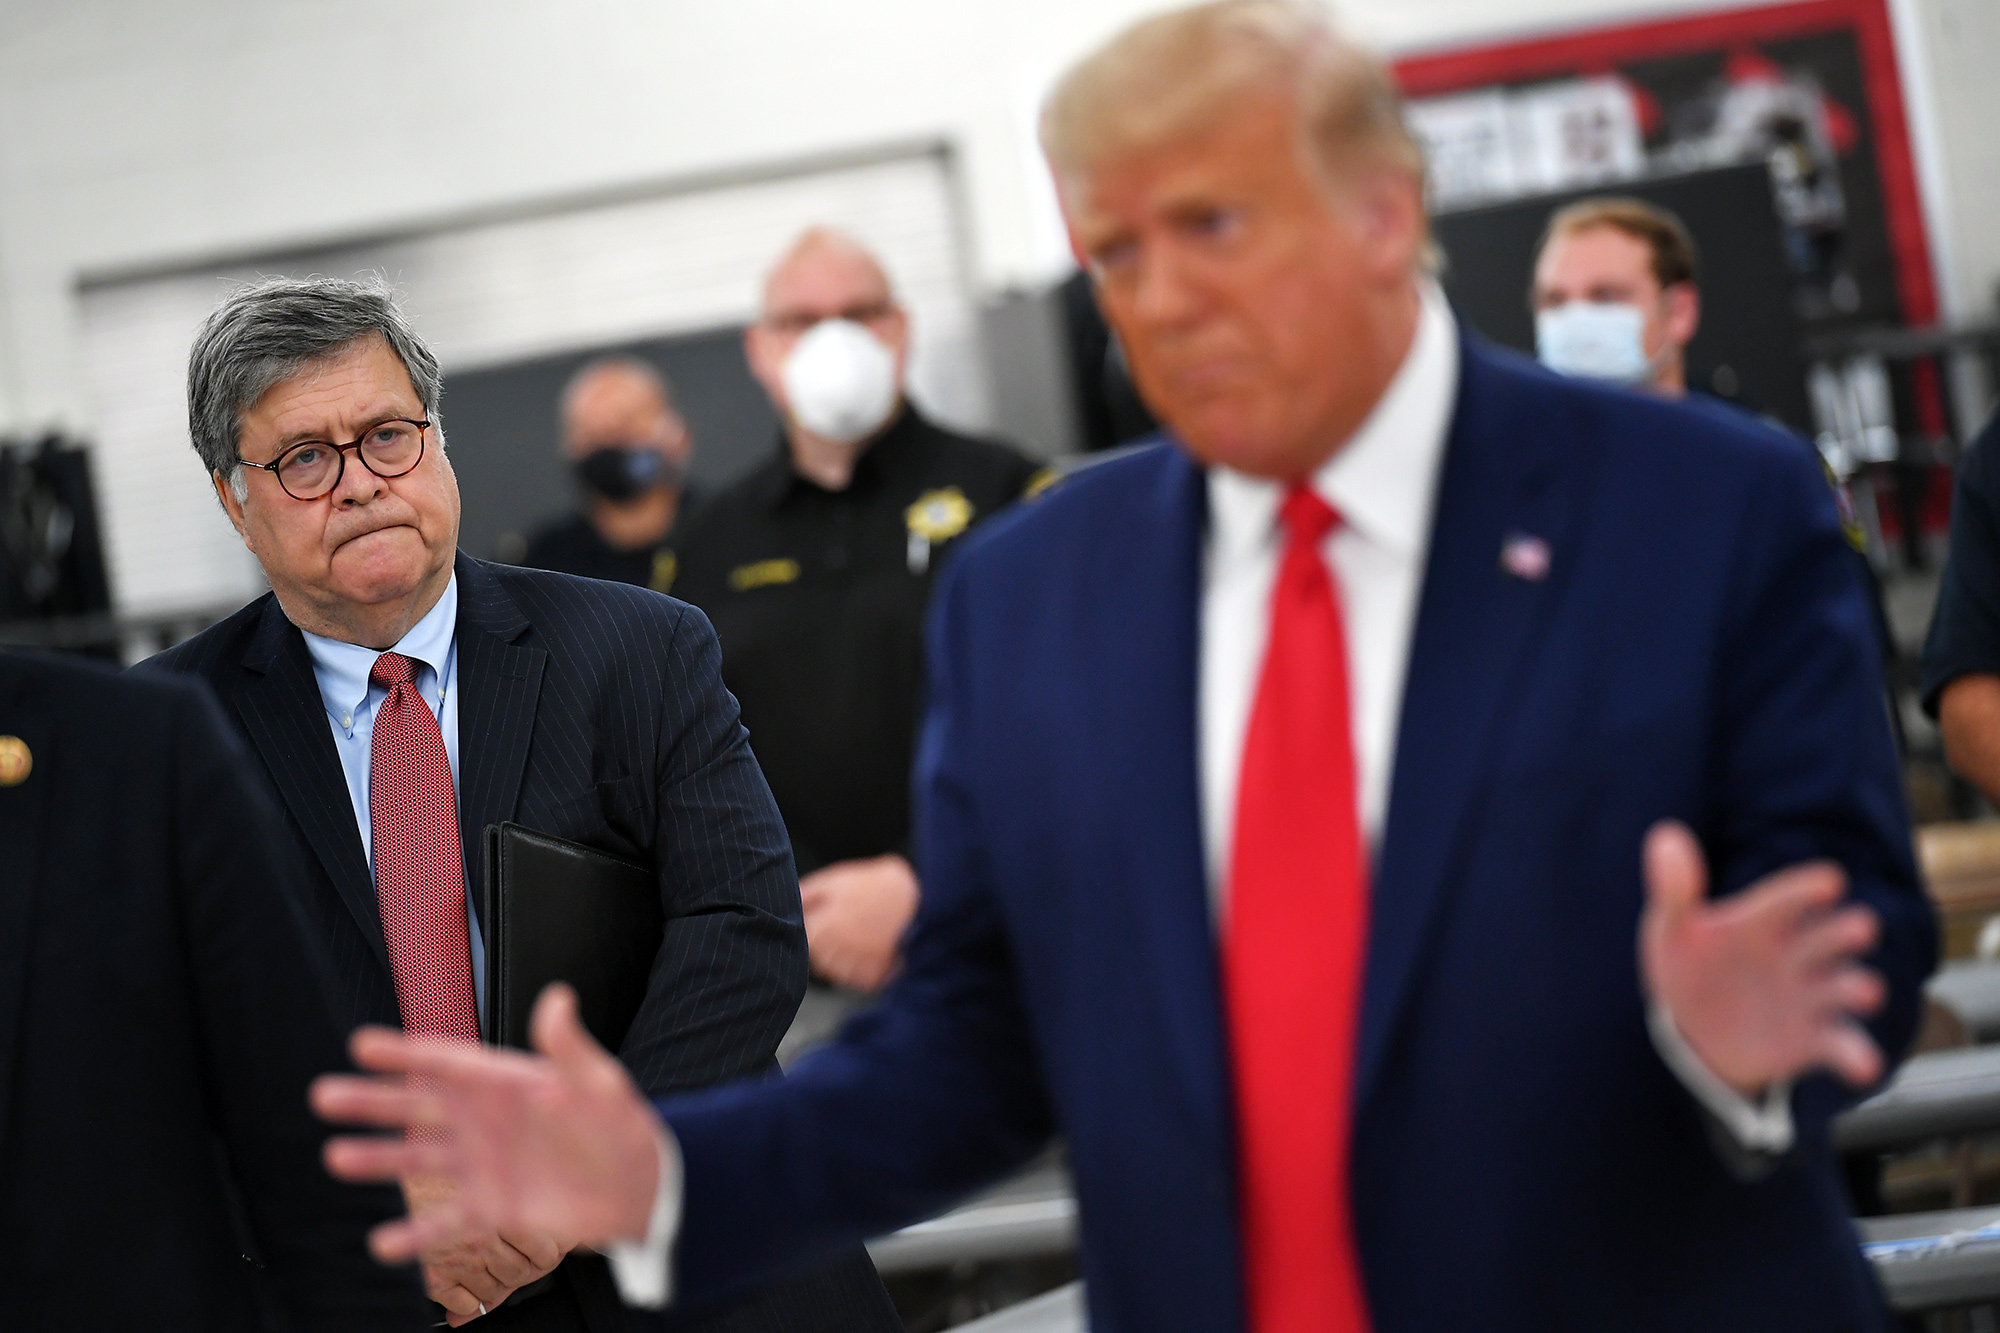 William Barr, left, listens as Donald Trump speaks during a visit to Mary D. Bradford High School in Kenosha, Wisconsin, on Sept. 1.